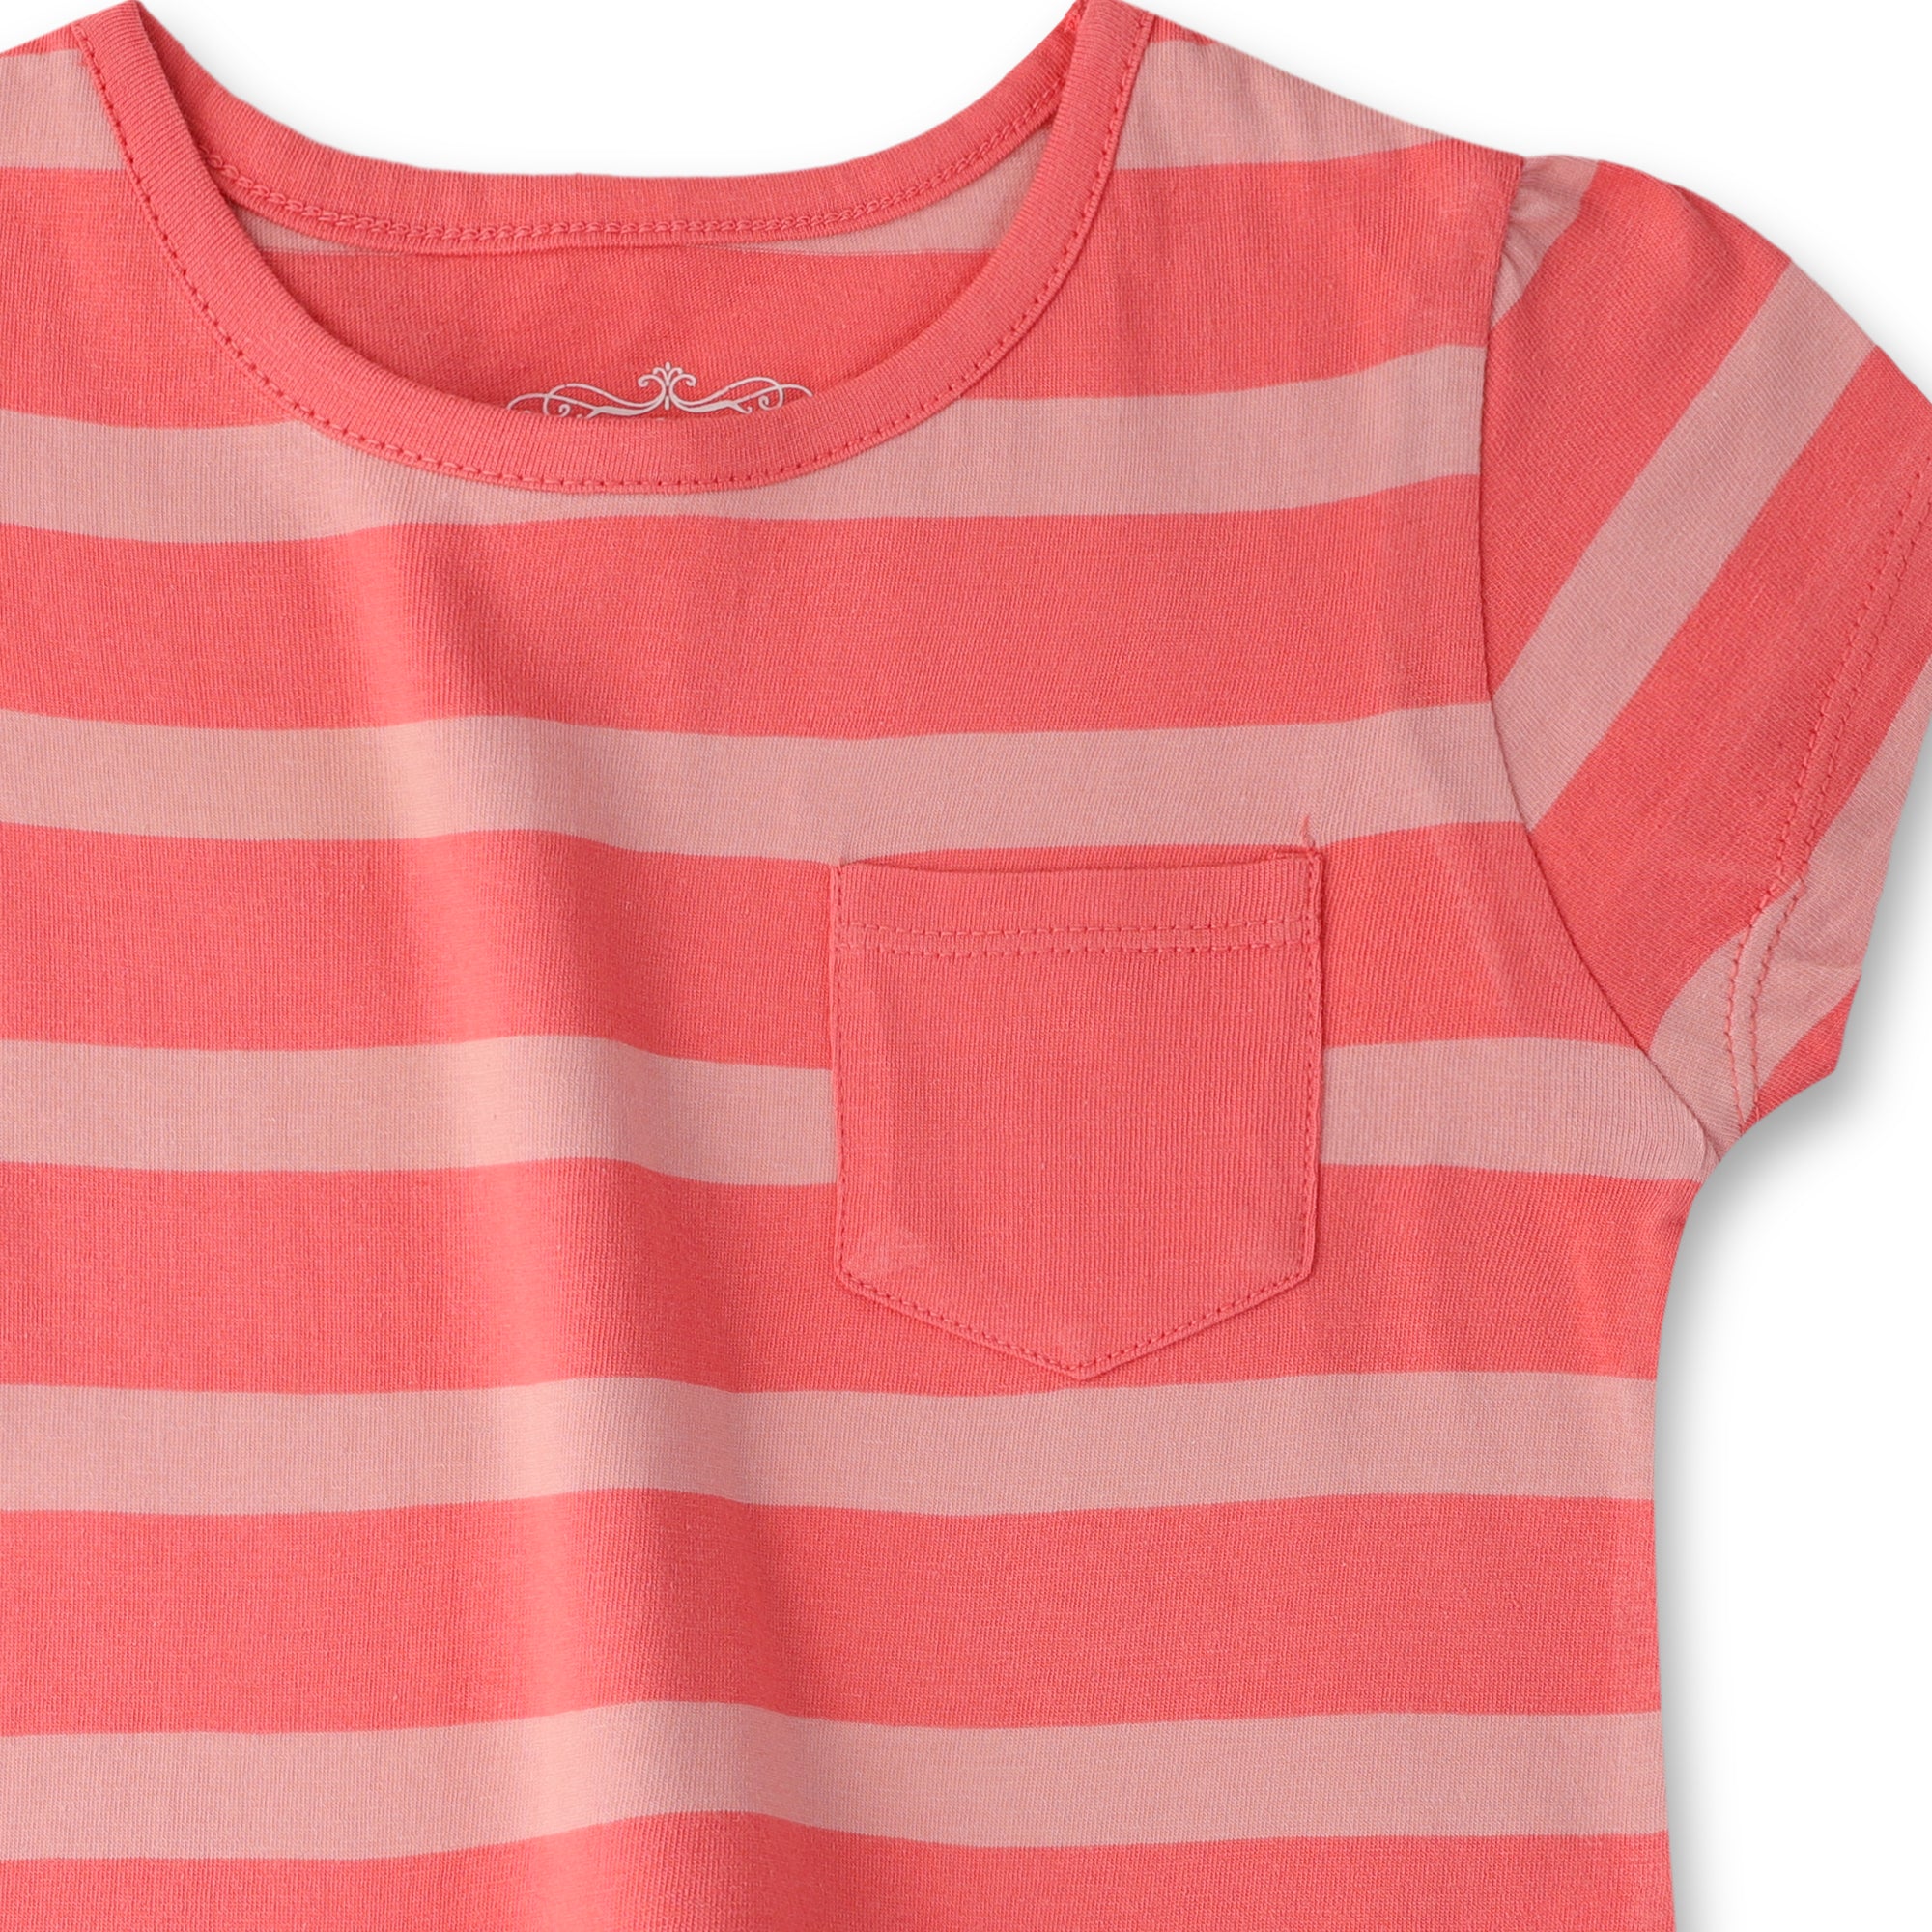 Short-sleeved Tunic in Dusty Pink and Salmon Pink